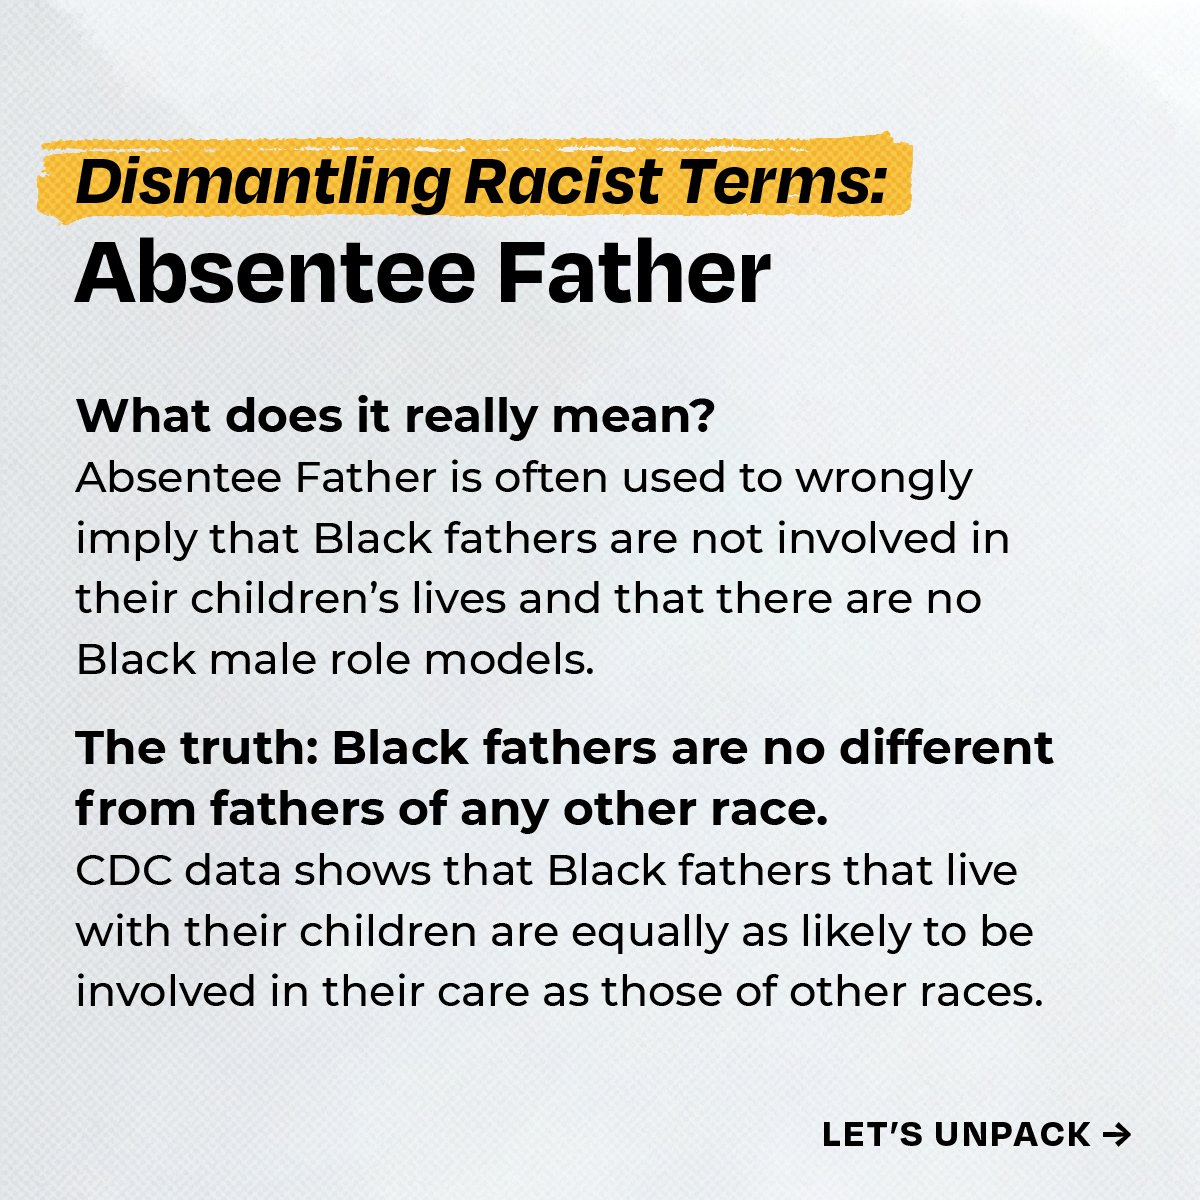 We’ve had enough of the dog whistles. COC +  @FamilyStory are teaming up to challenge harmful narratives about  #BlackFamilies. Today, it’s time to remove “absentee father” from the narrative. Read 'Changing the Narrative About Black Families.'  https://colorofchange.org/narrativepower/ 